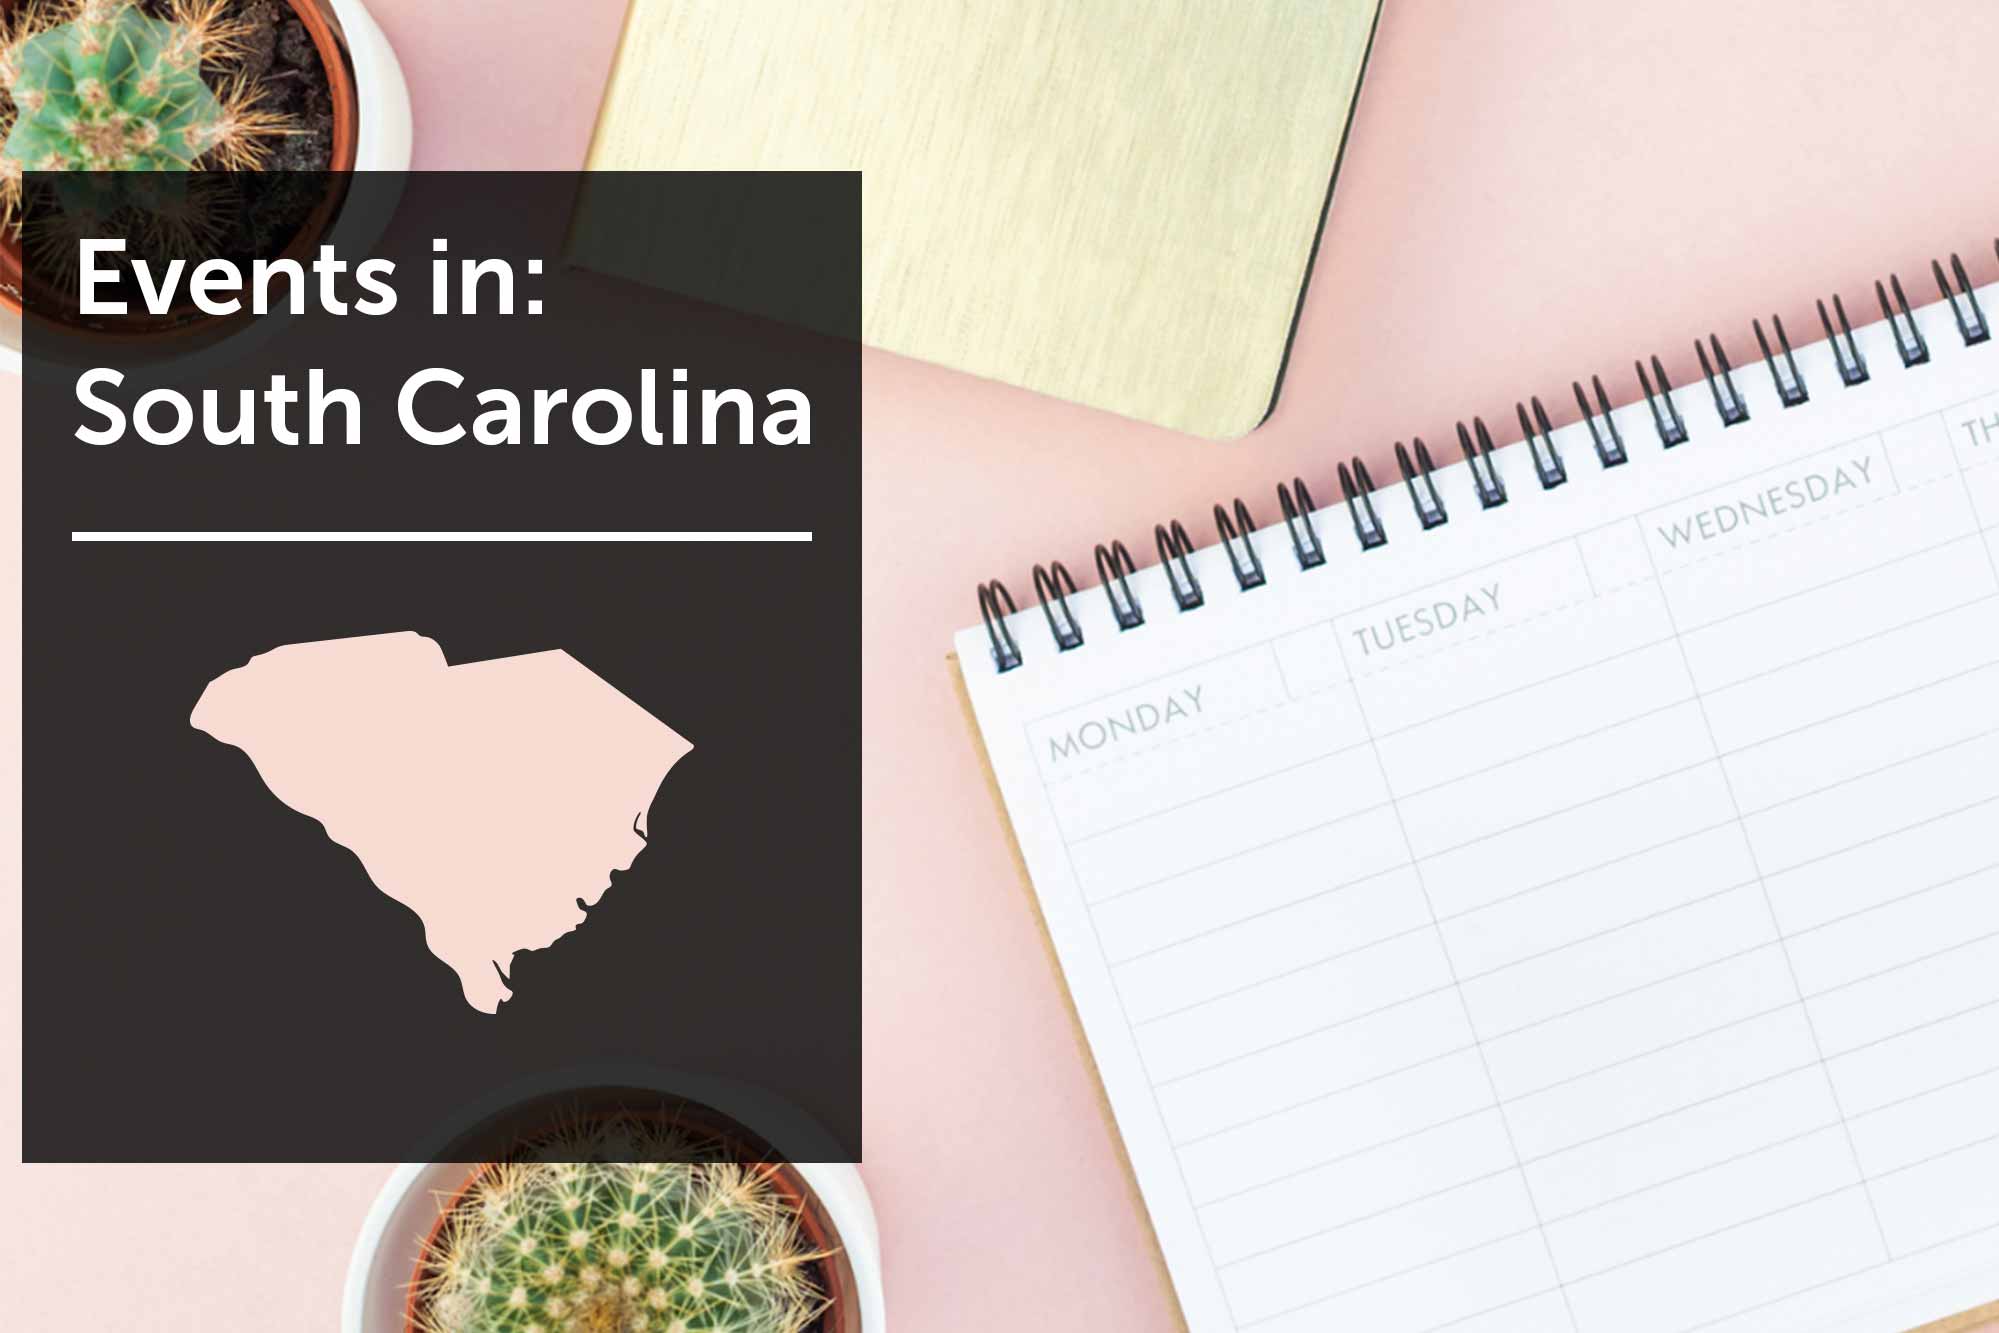 Women's business events in South Carolina